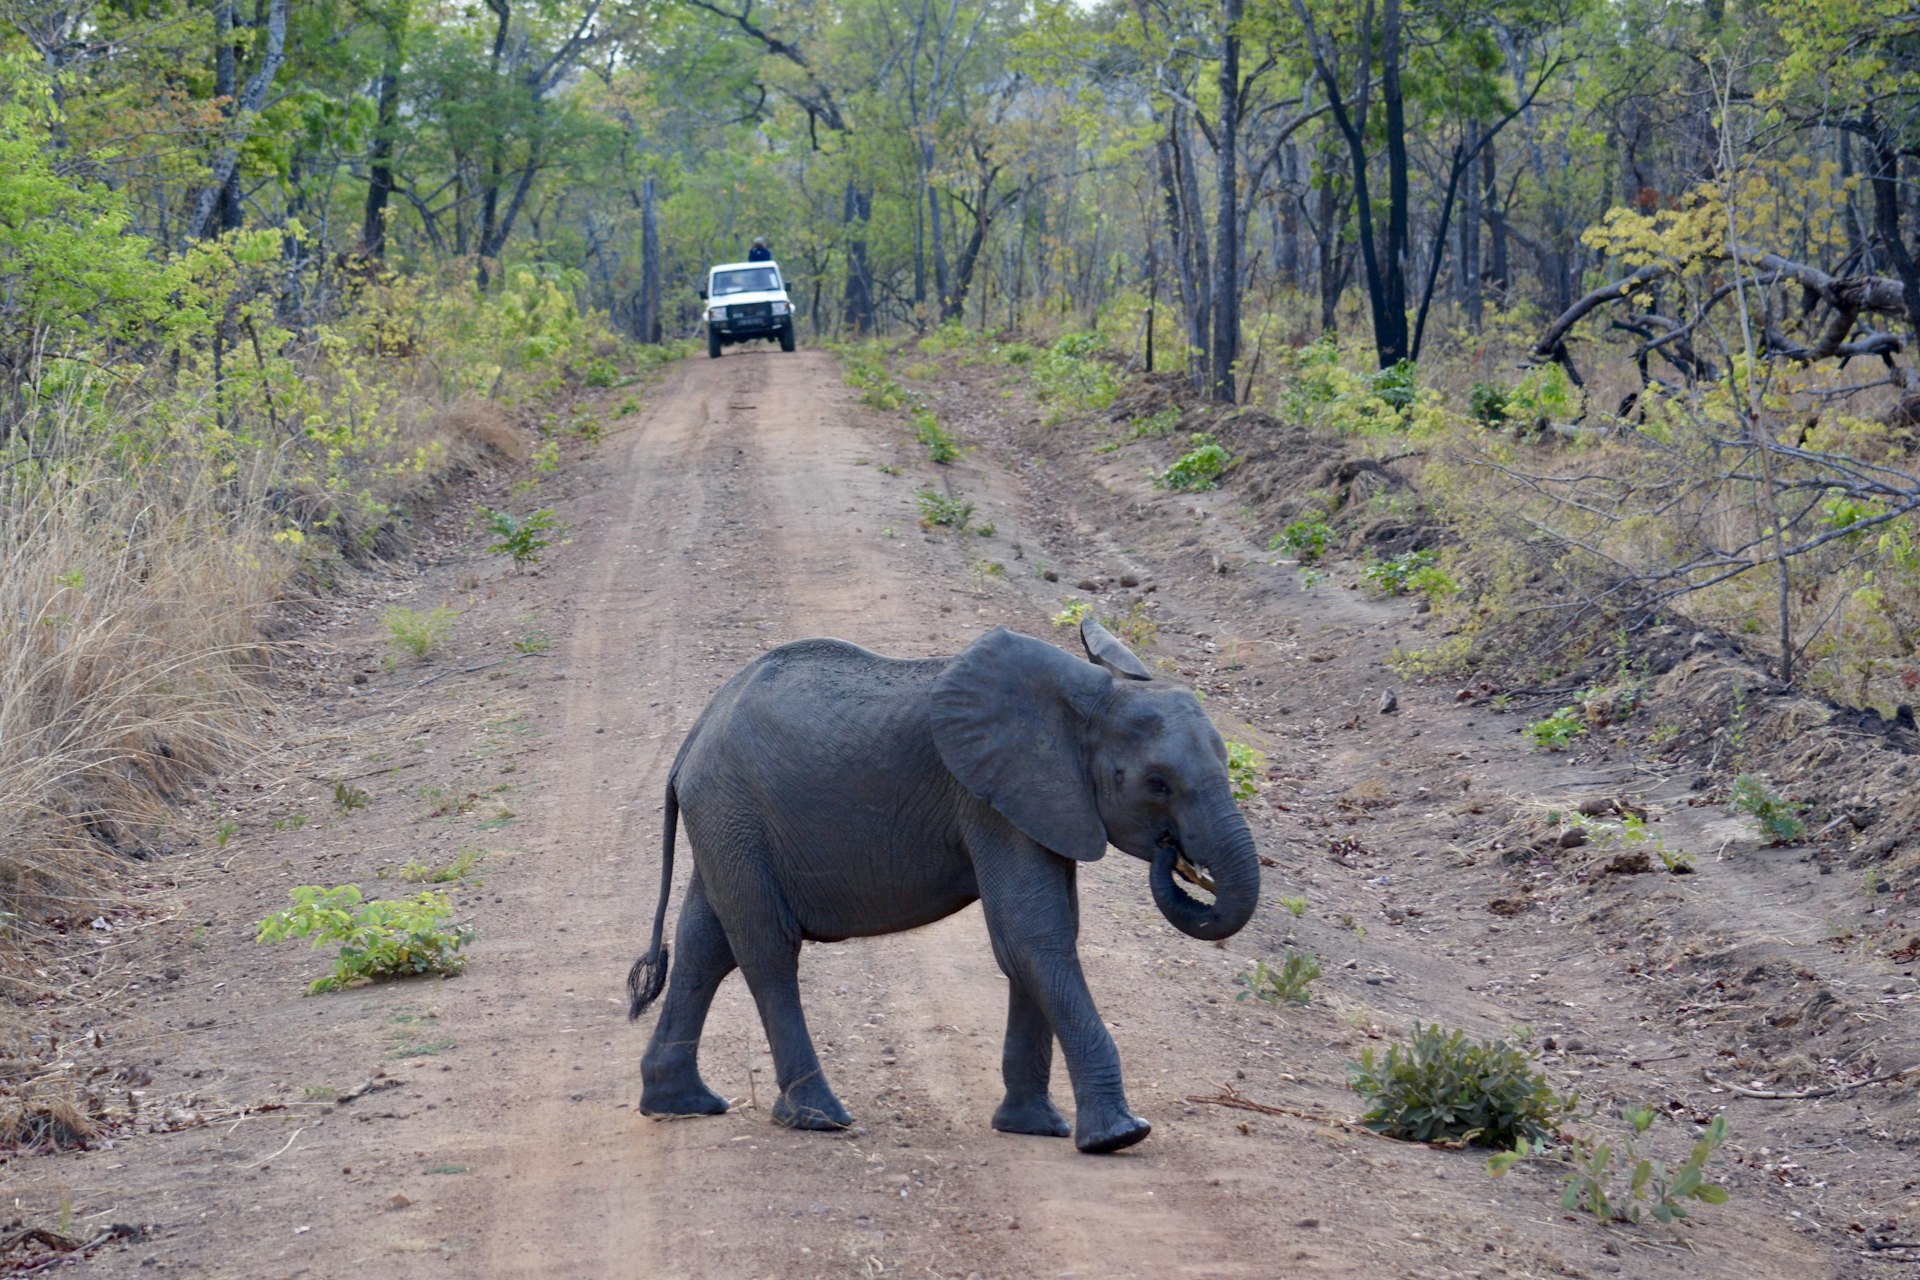 Elephant calf on the road as a jeep approaches at Nkhotakota Wildlife Reserve, Malawi